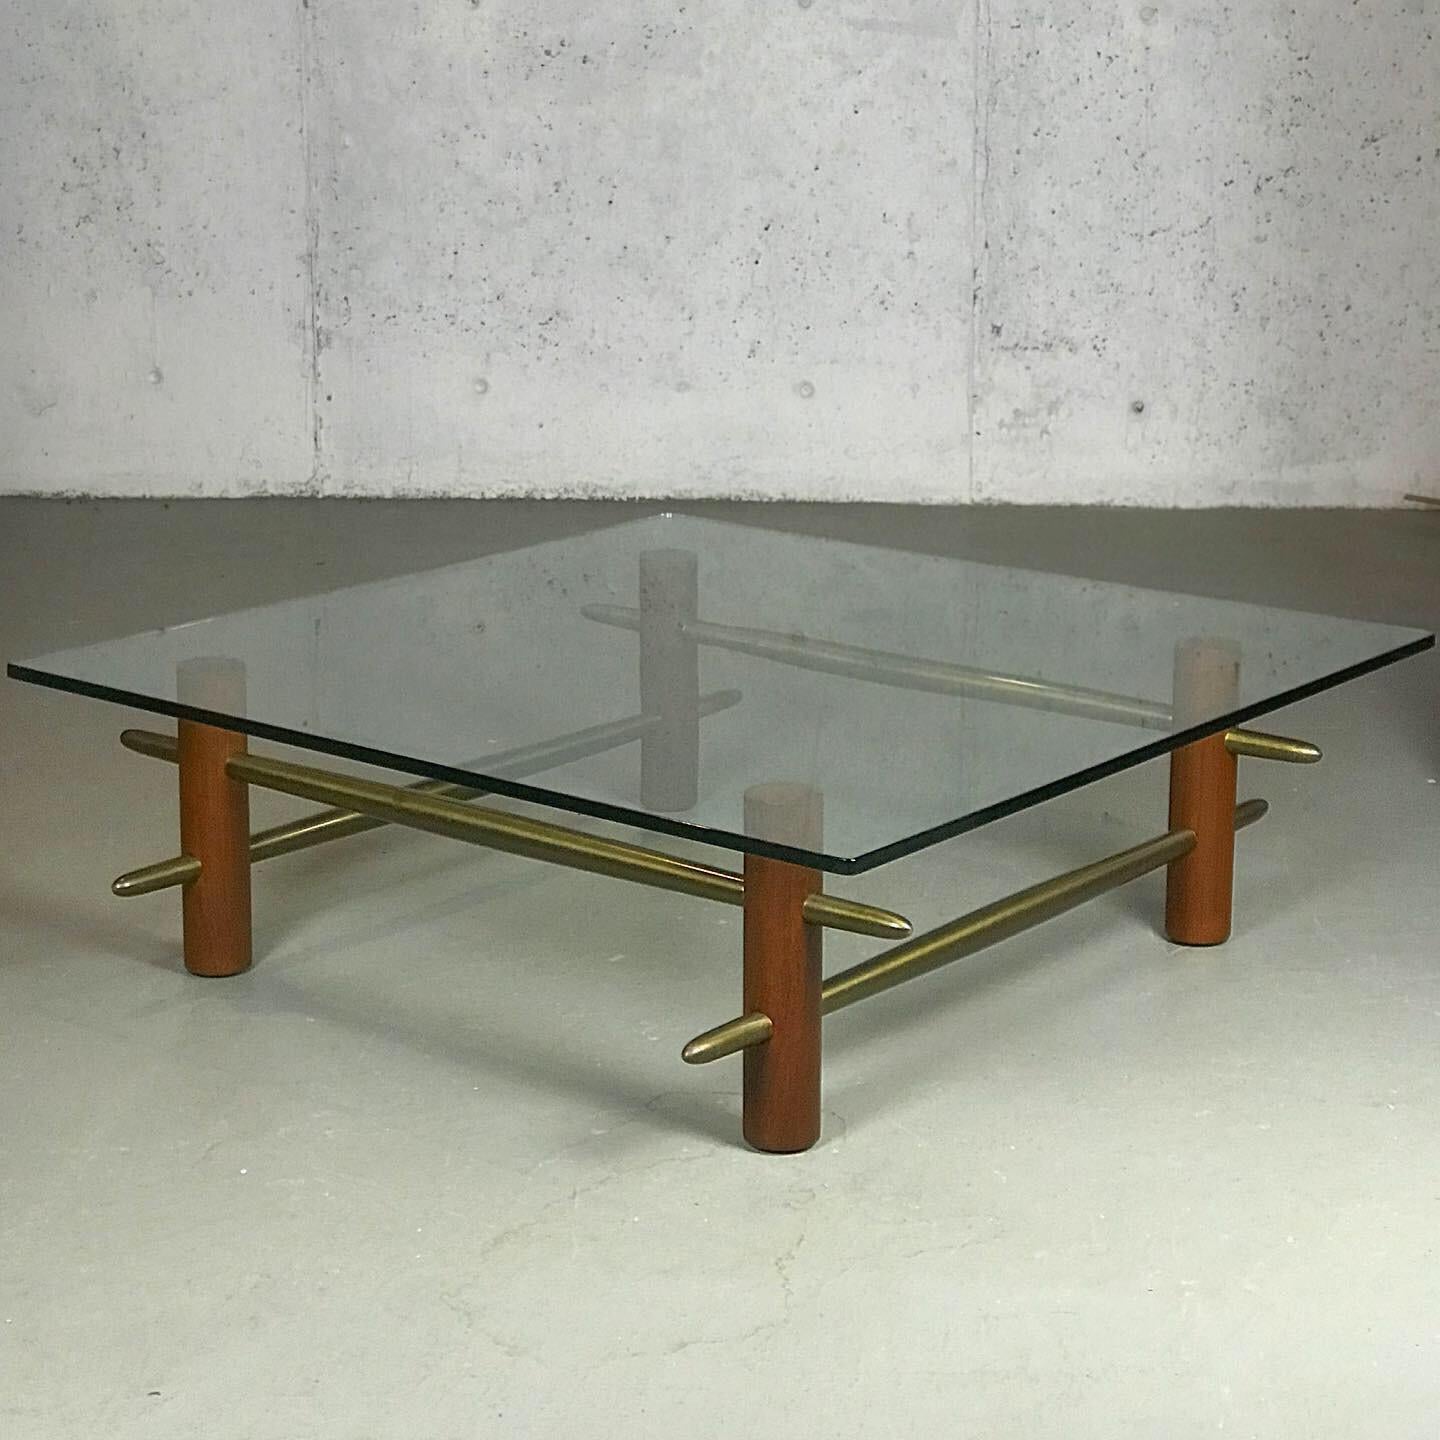 Excellent and rare early 1950s coffee table made of walnut, glass and solid brass stretchers, by T.H. Robsjohn-Gibbings for Widdicomb Furniture Co, circa 1952.
The size and craftsmanship are hard to capture in the pictures. When taking it apart to